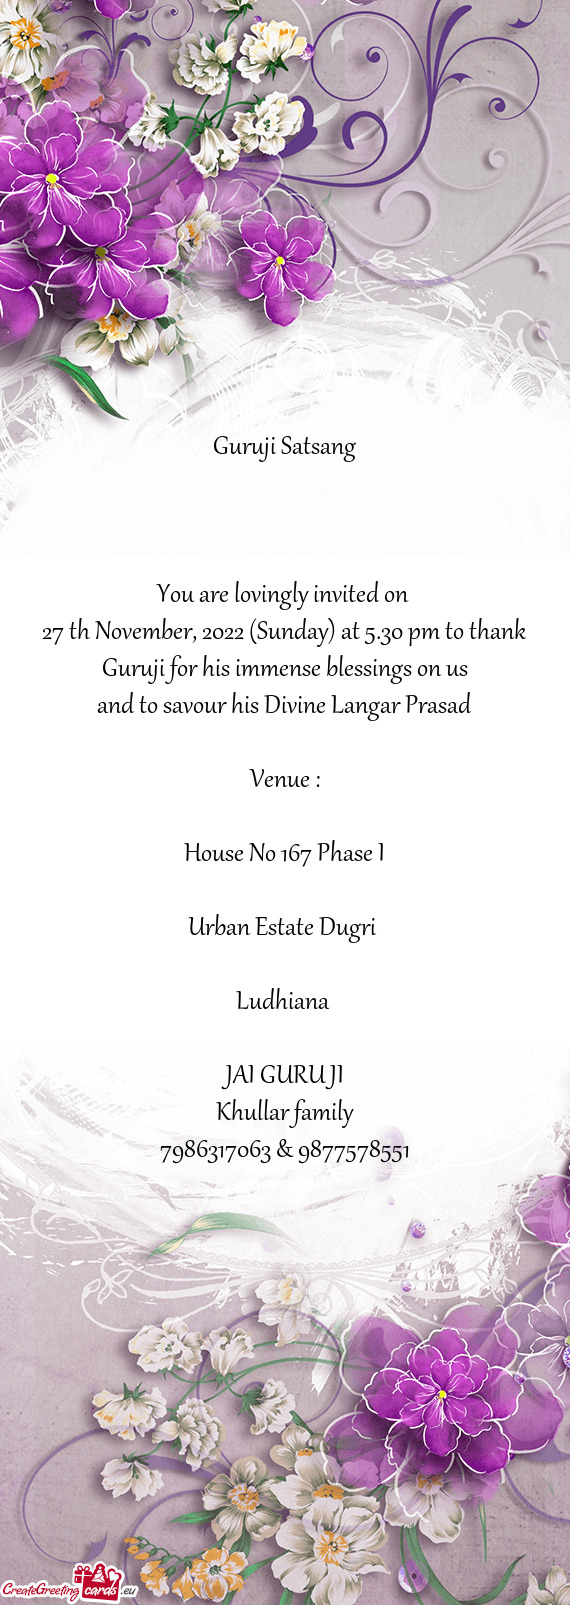 27 th November, 2022 (Sunday) at 5.30 pm to thank Guruji for his immense blessings on us